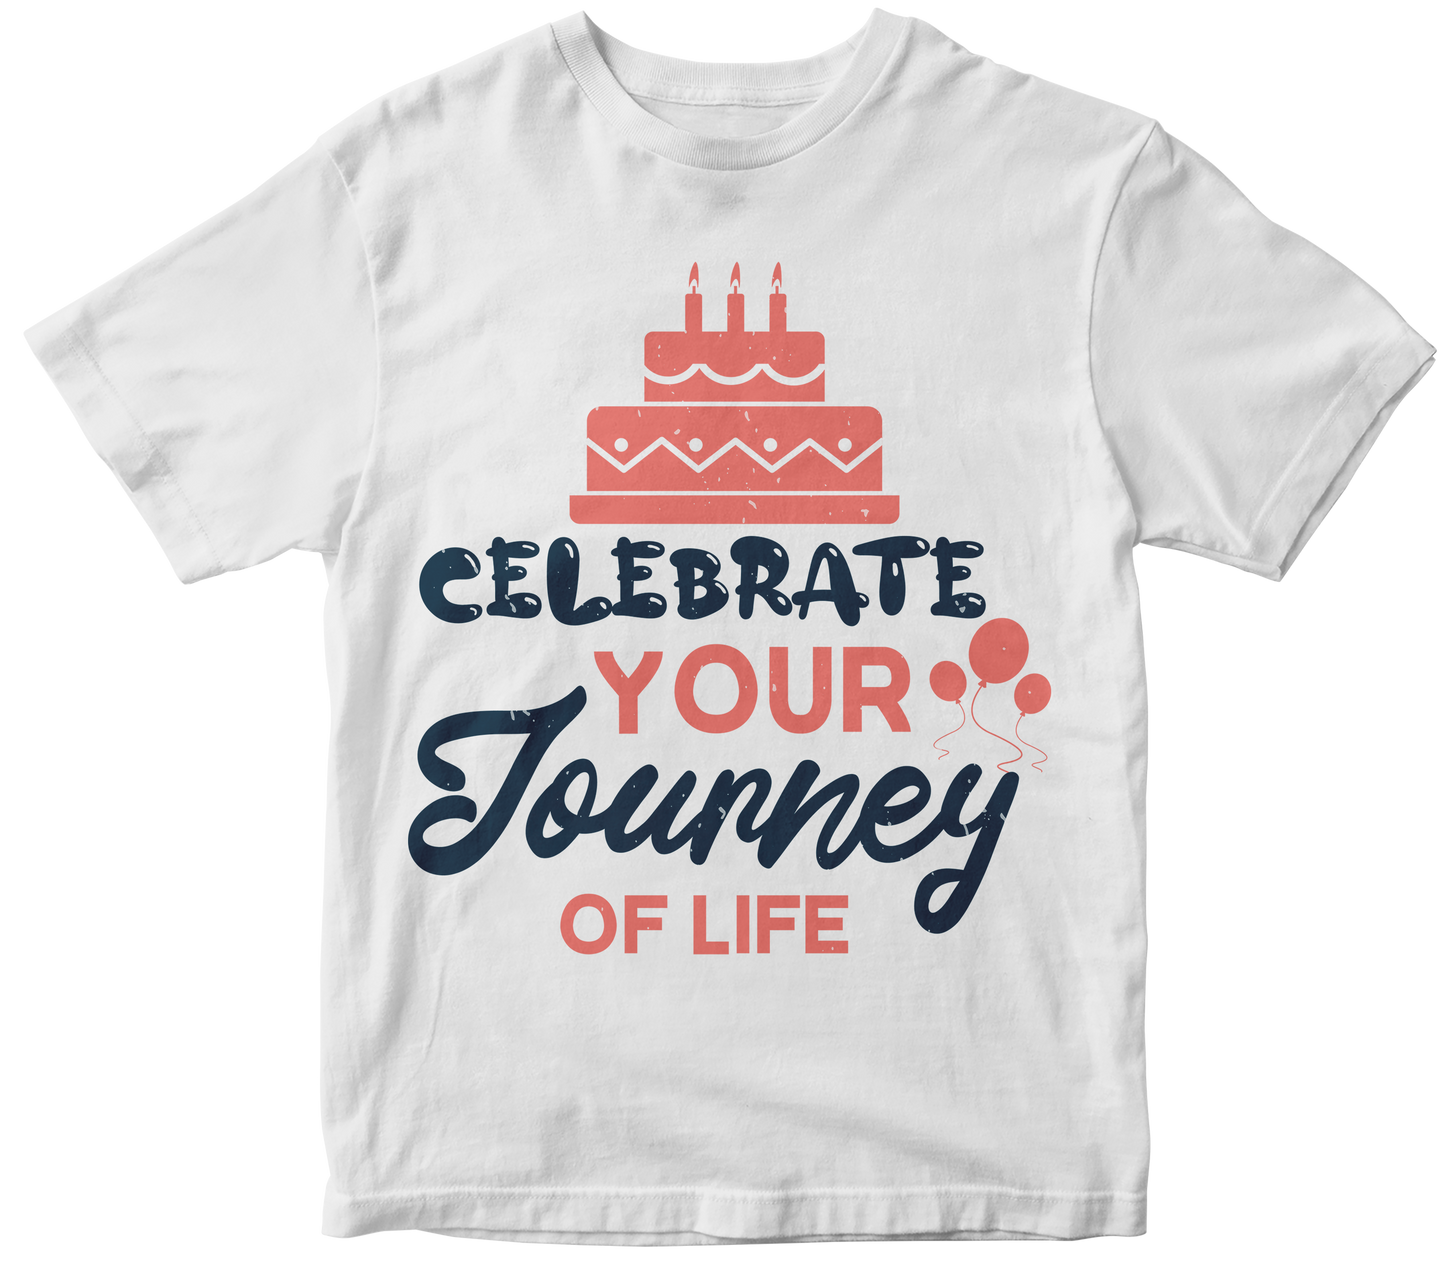 Celebrate your journey of life